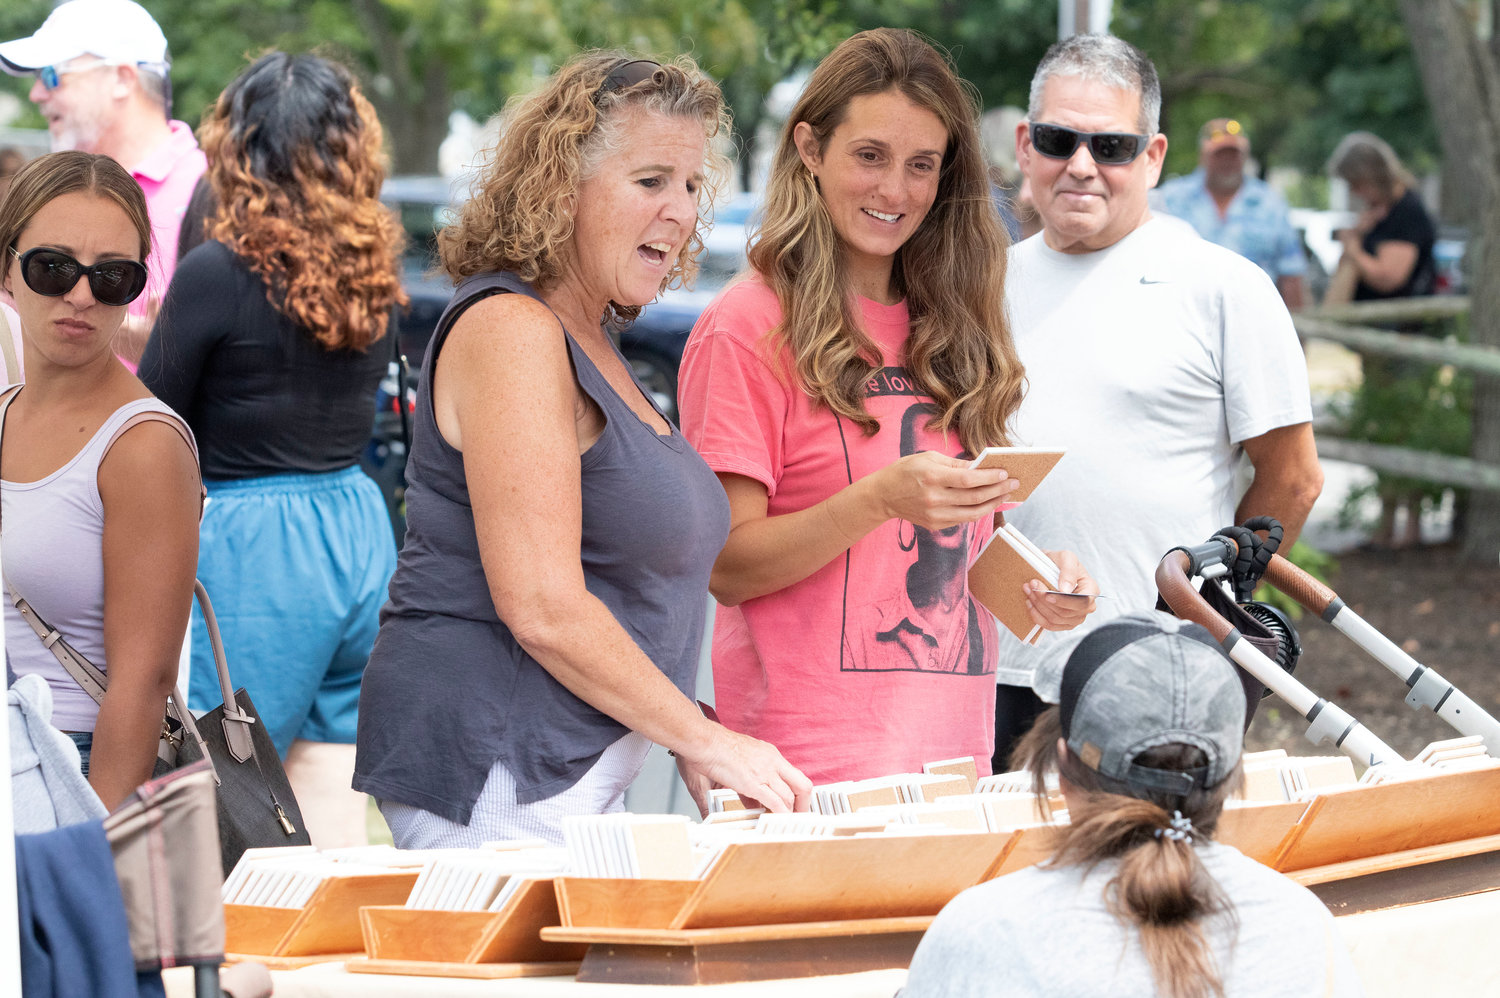 Pam Sheerin (left) and Jillian Amaral check out hand made coasters by Christine Jannerelli at the 2022 "The Looff" East Providence Arts Fest Saturday, Aug. 13.